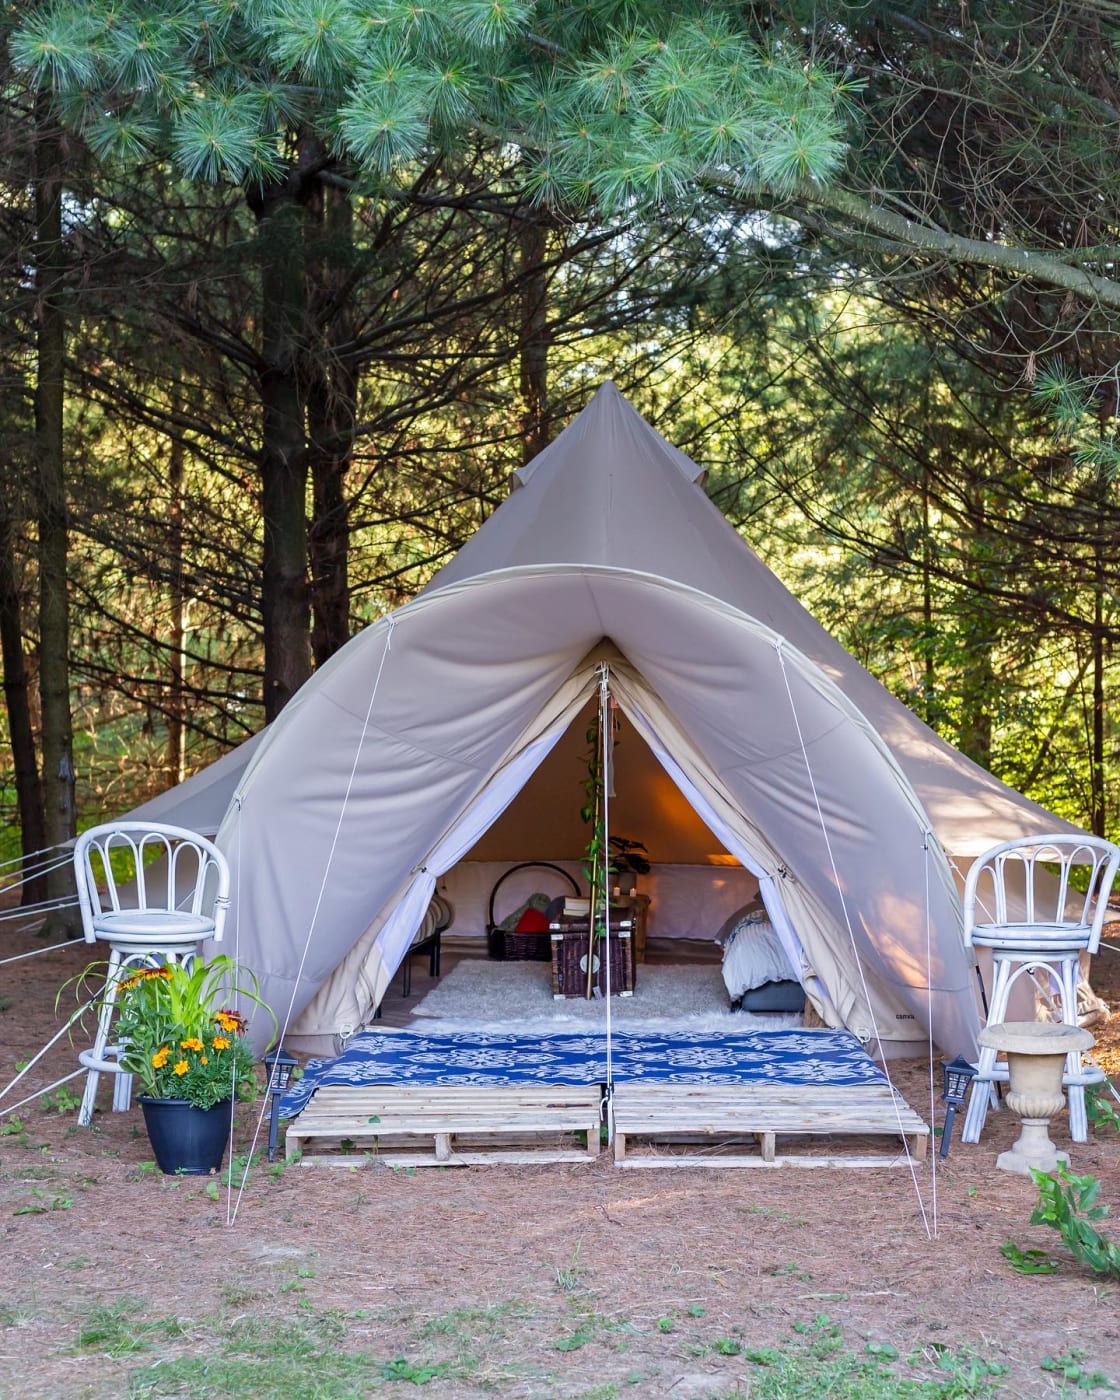 Our glamping tent is tucked into the pine forest, sheltered from the elements 🌞